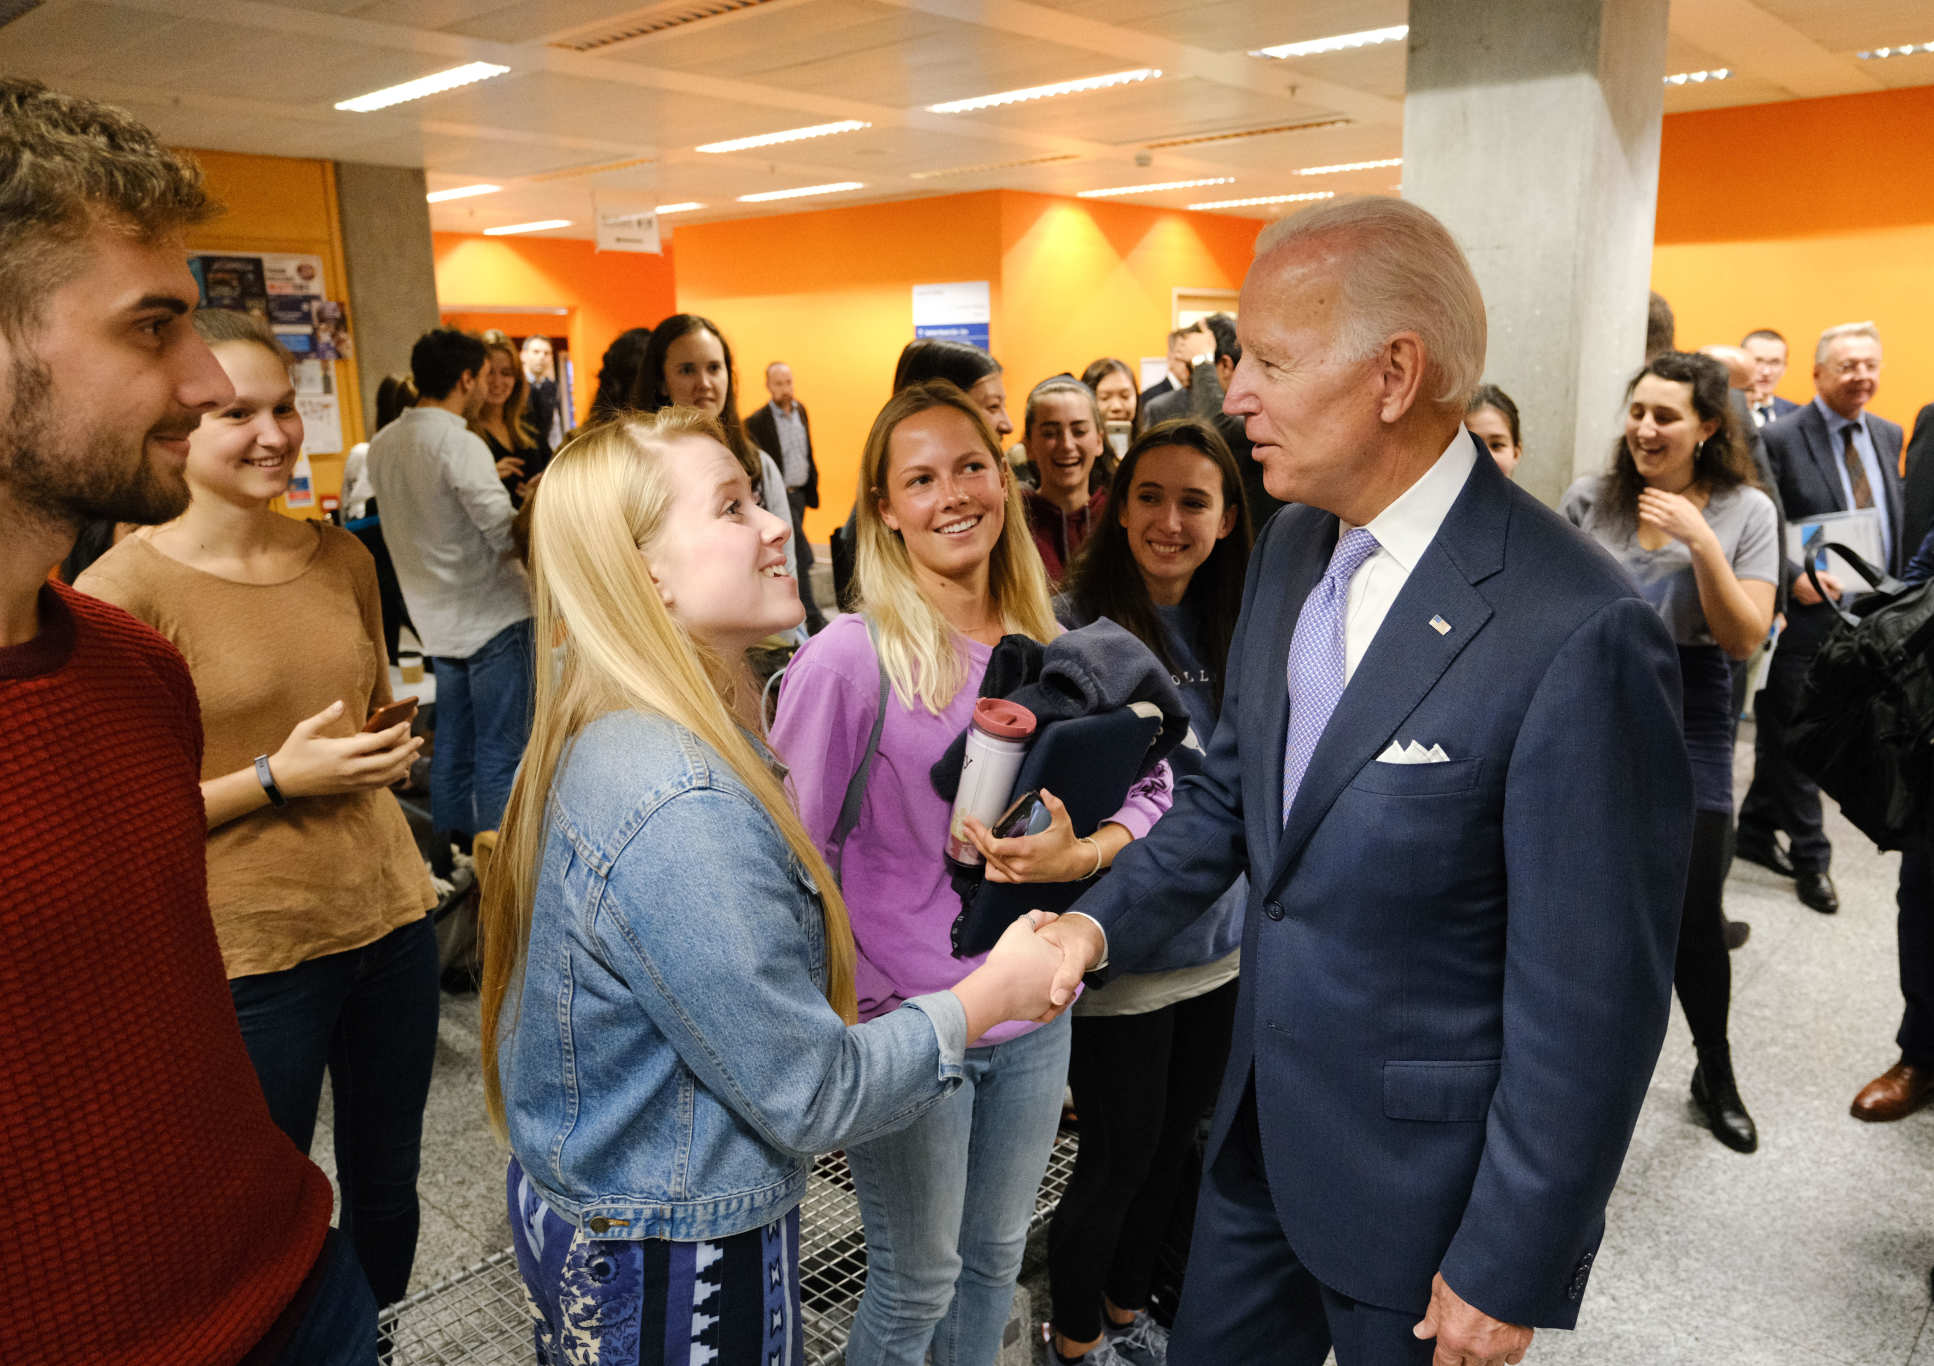 Vice President Biden spent time after his lecture meeting Imperial's talented students